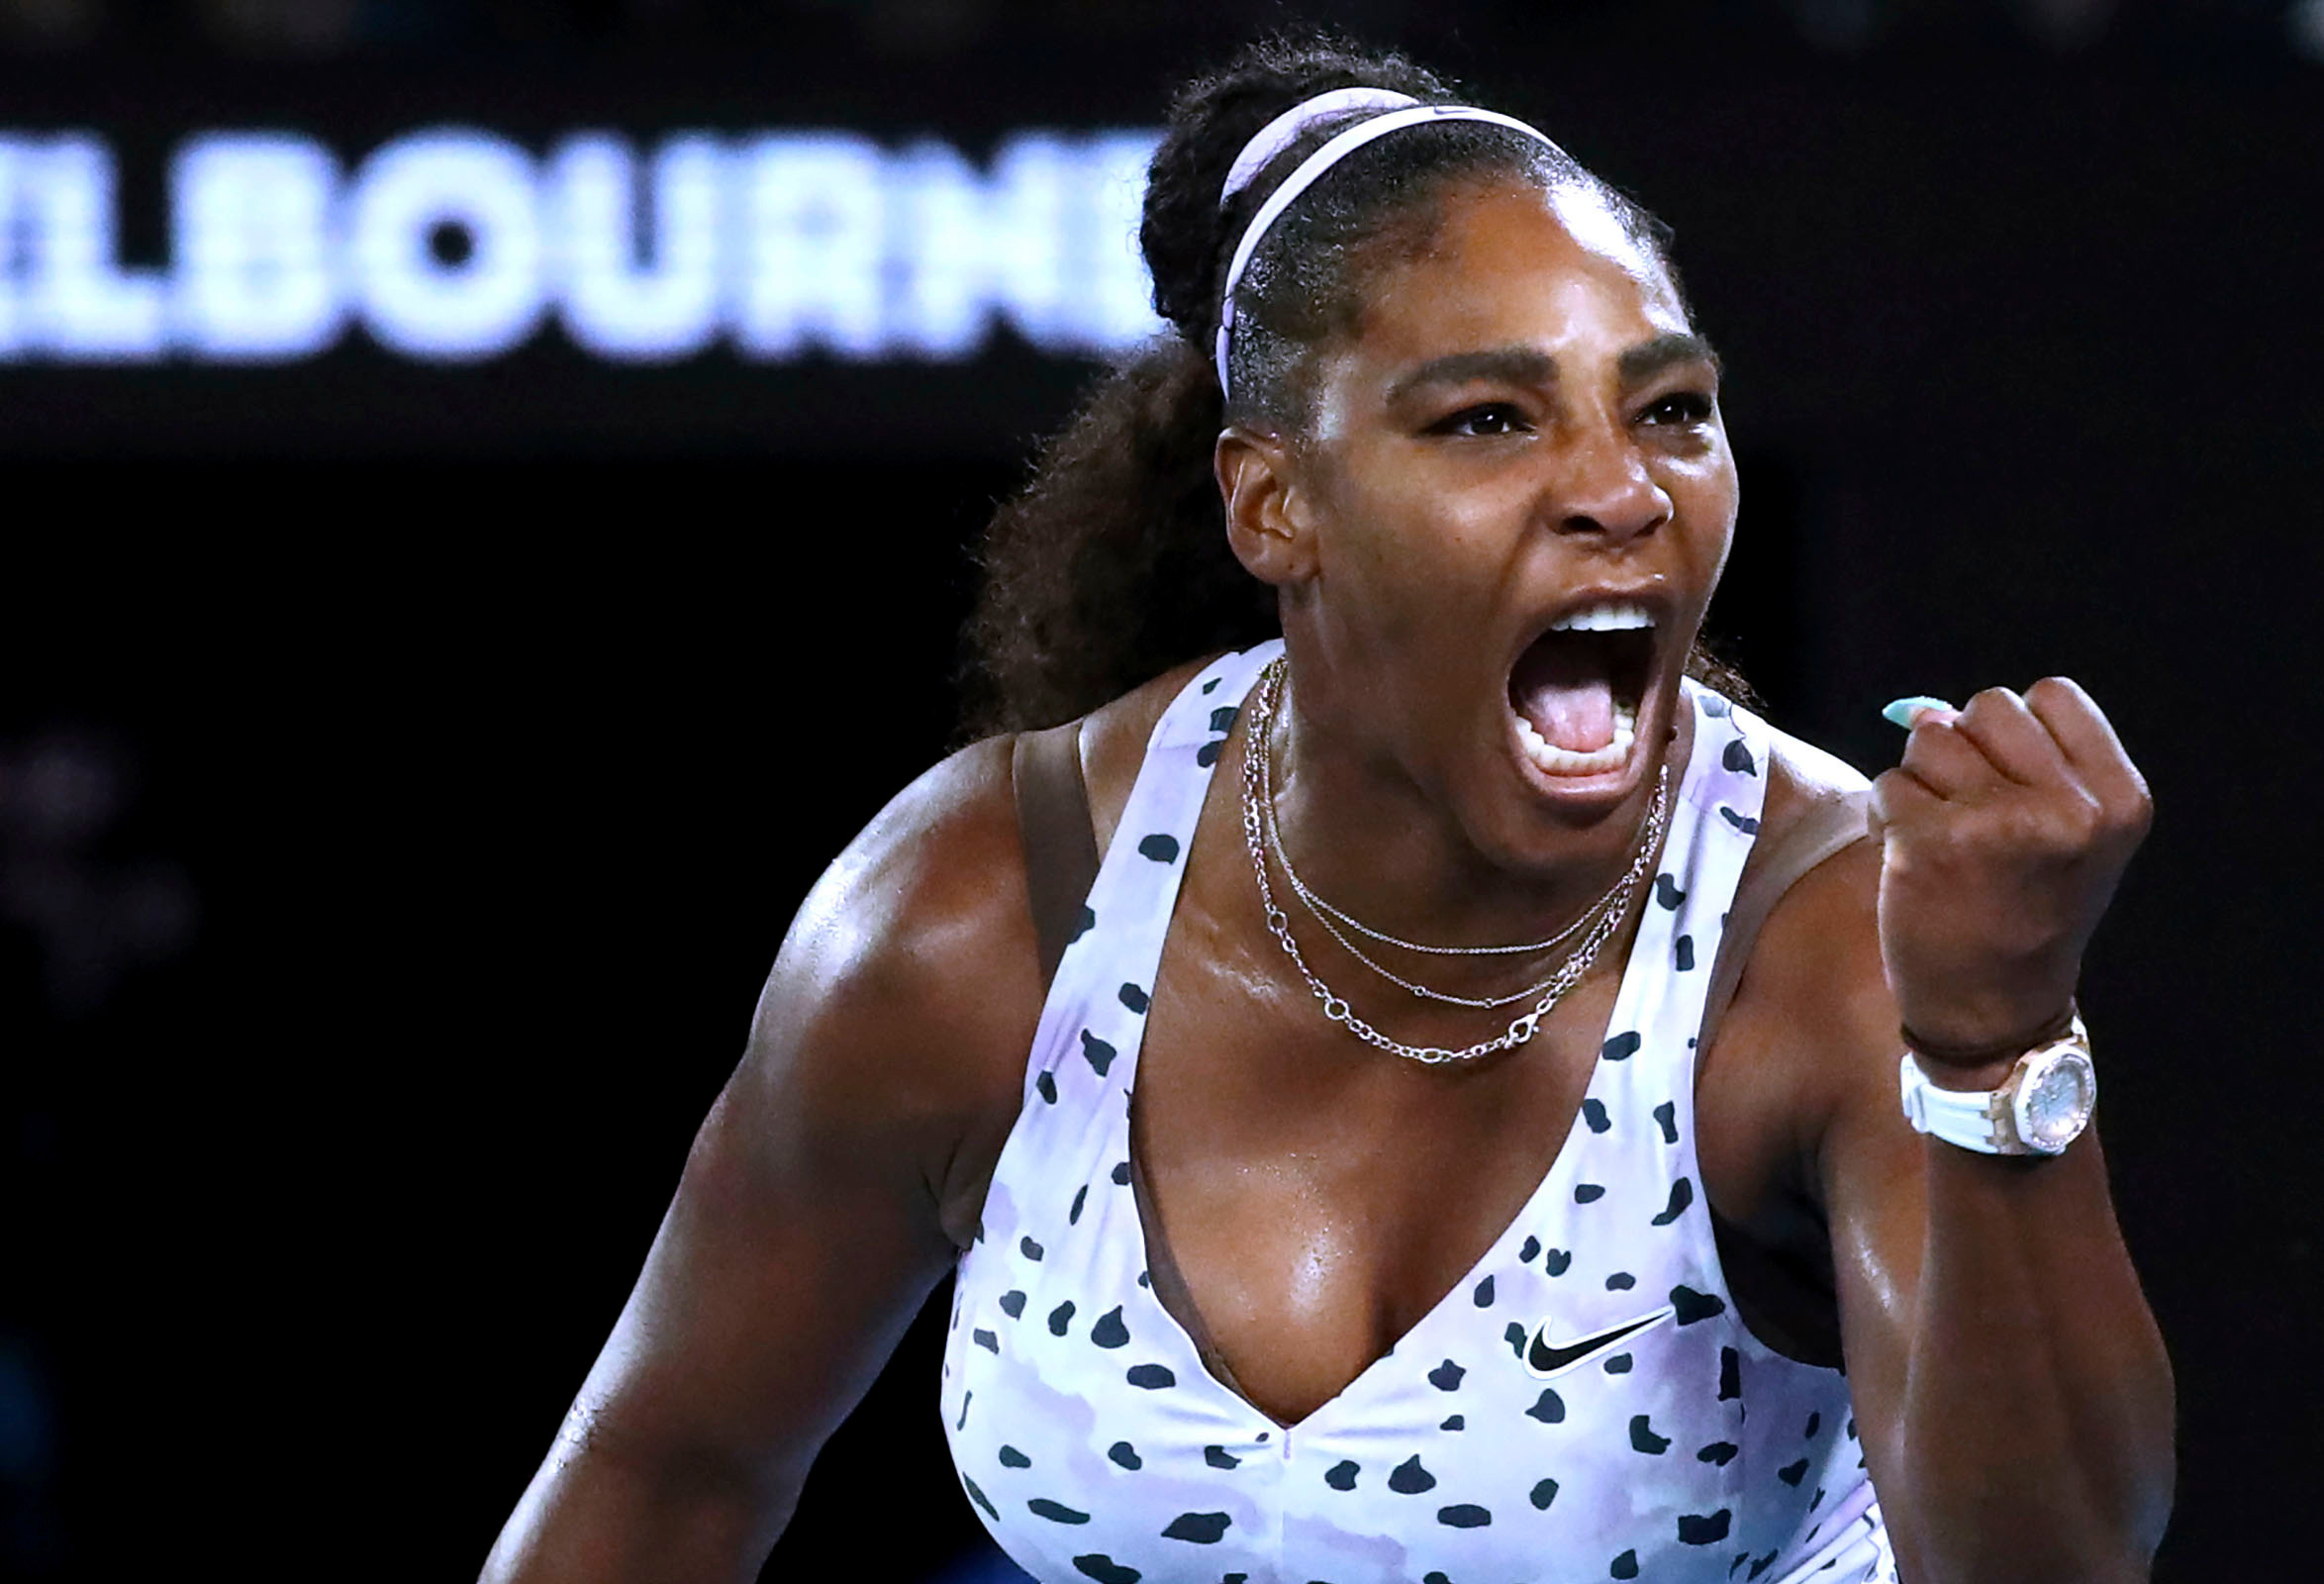 Tennis-Serena says she needed time to heal after rough 2021